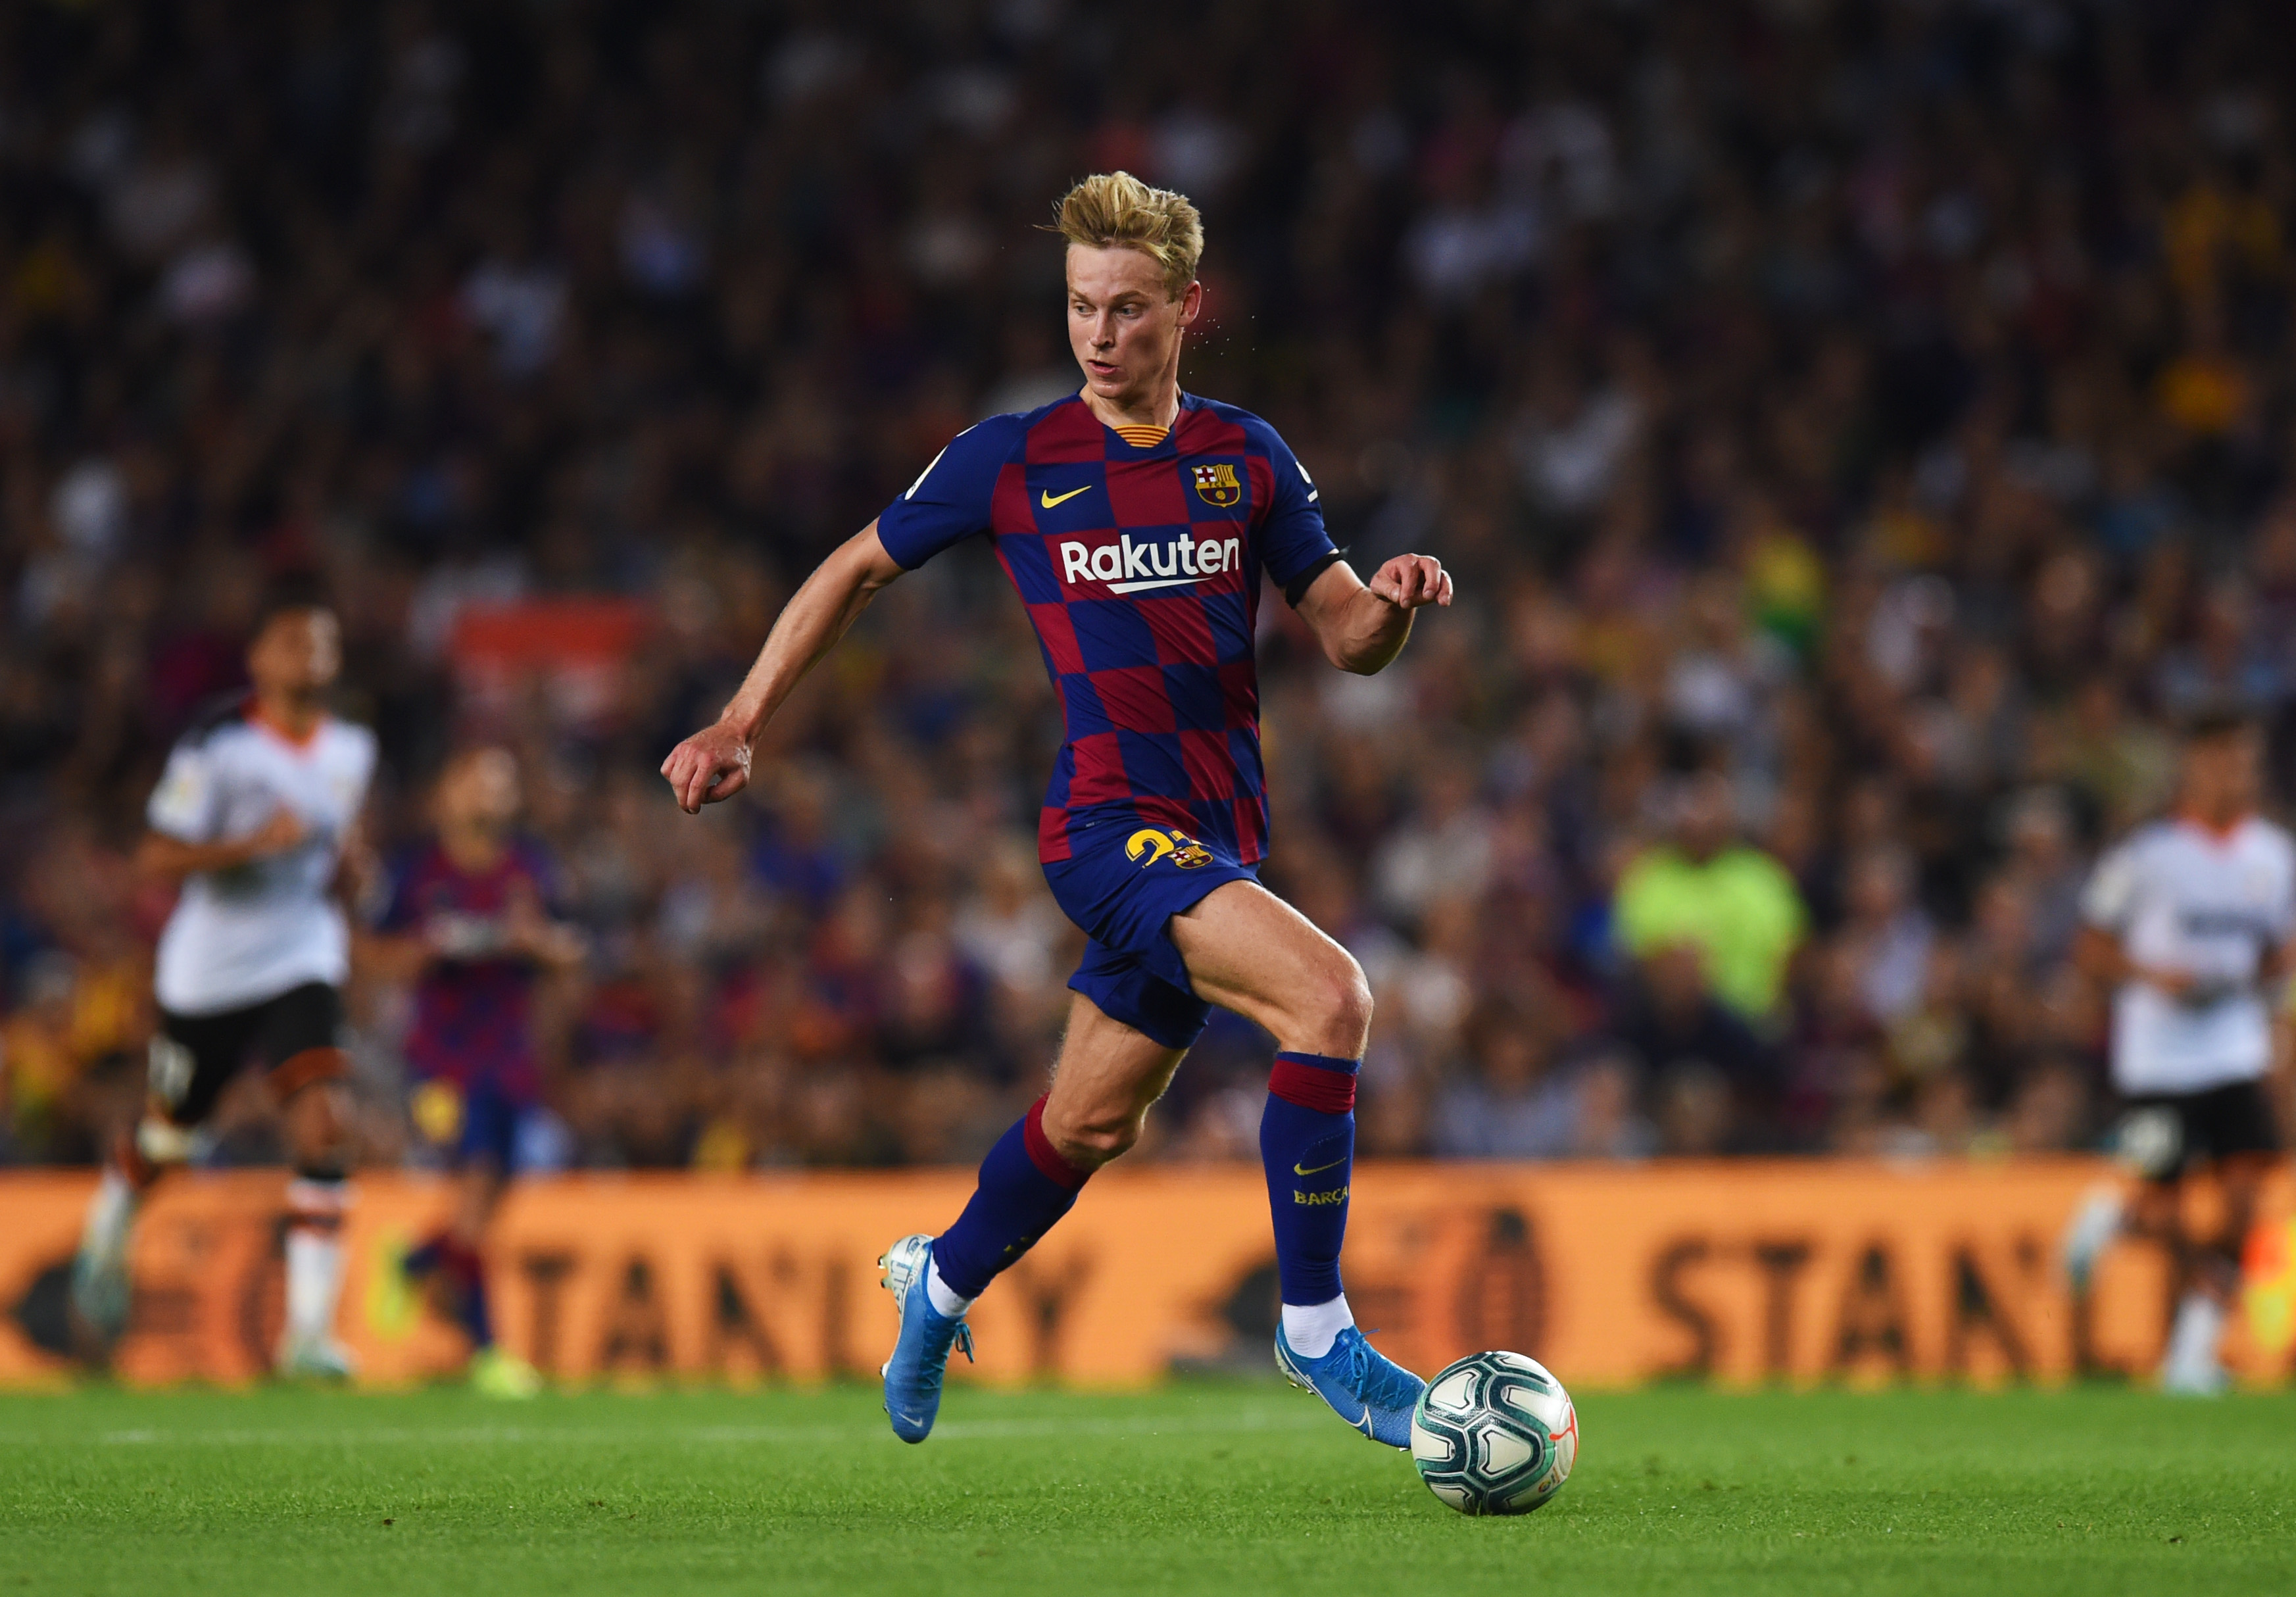 de Jong scored his first goal for Barcelona (Photo by Alex Caparros/Getty Images)